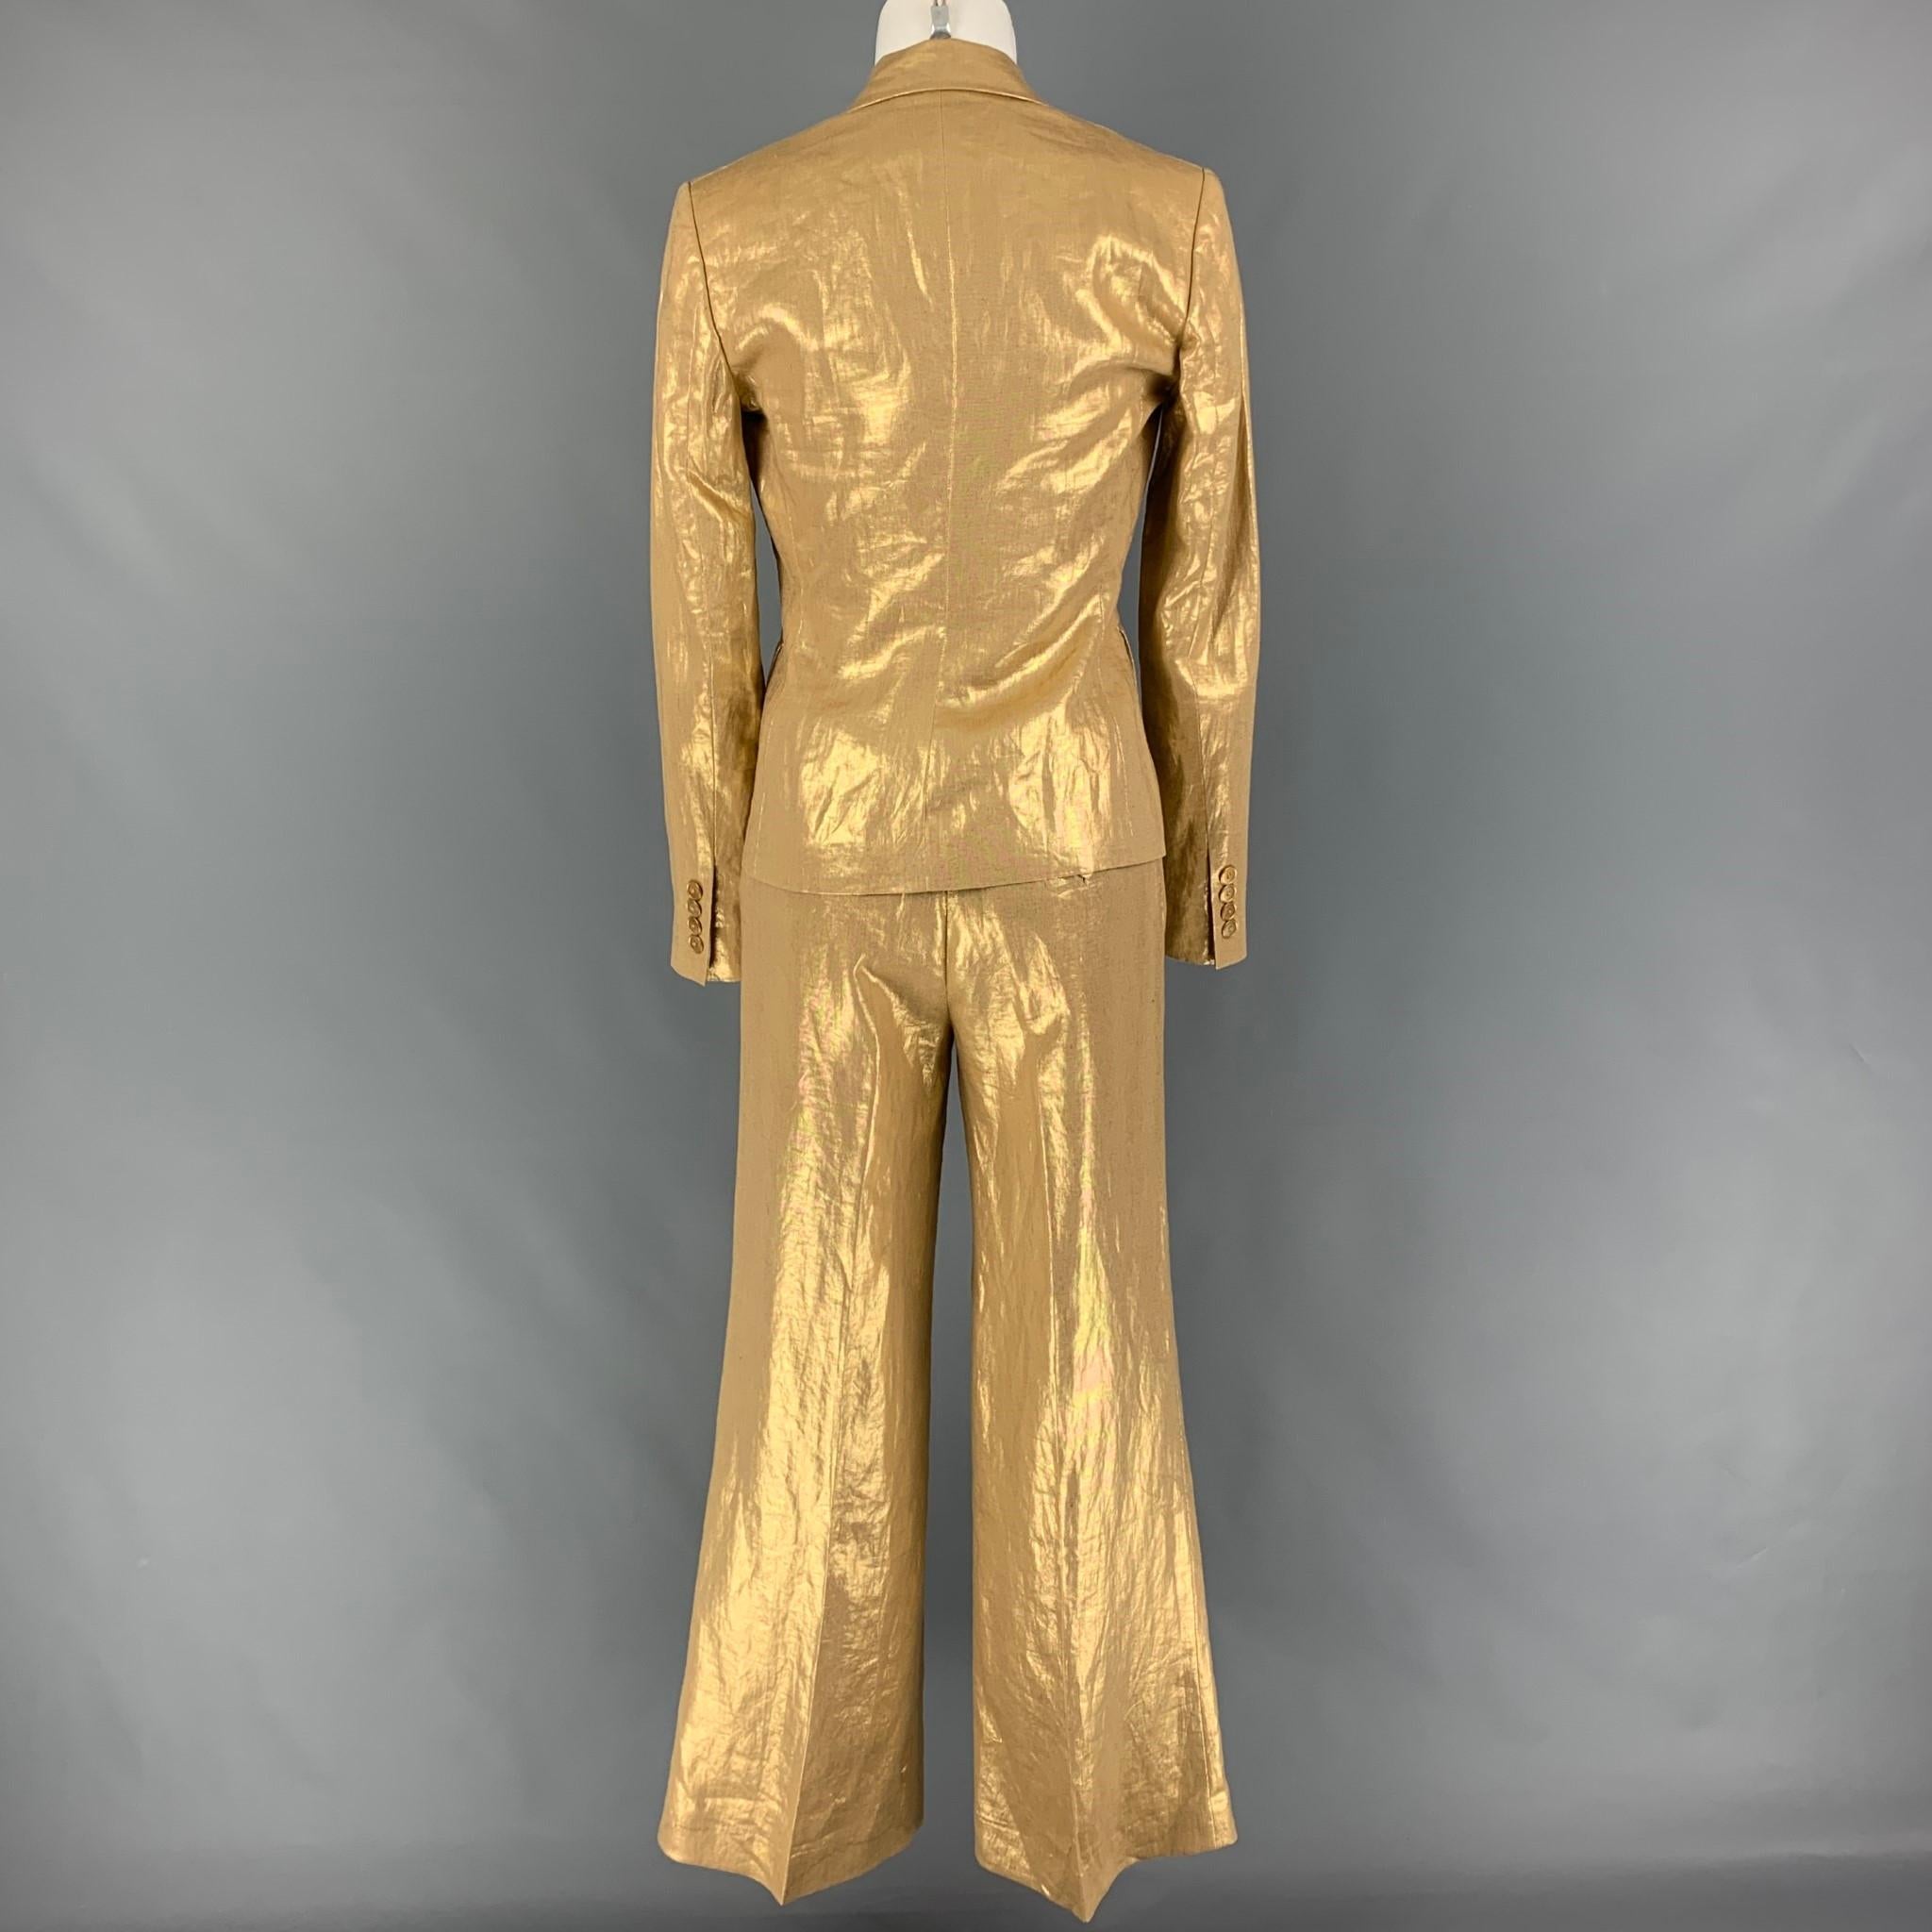 RALPH LAUREN 'Black Label' suit comes in a gold metallic linen featuring a notch lapel, flap pocket, single spread blaze and matching wide leg pants. Made in USA. 

Excellent Pre-Owned Condition.
Marked: 2

Measurements:

-Jacket
Shoulder: 15